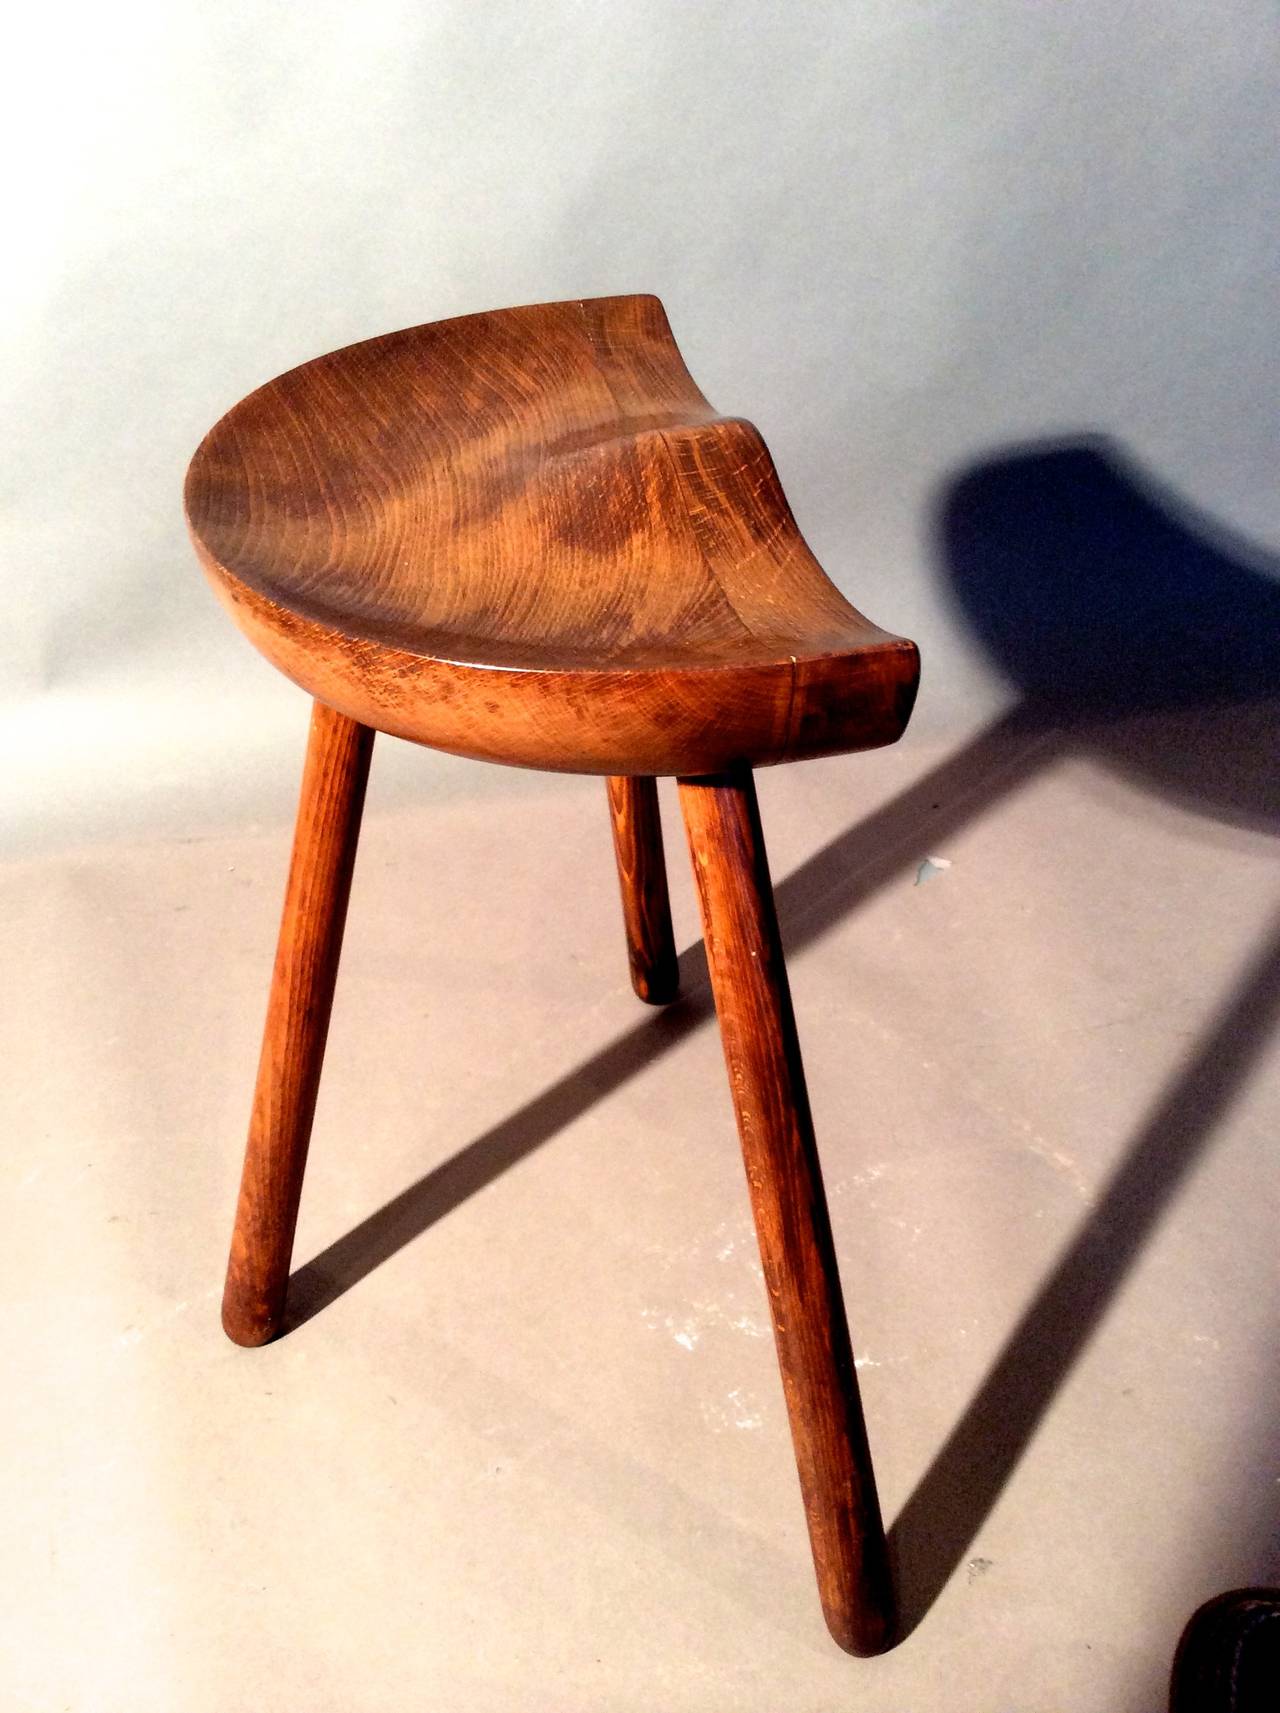 Three-legged wooden stool made in Denmark circa 1940s in the style of Mogens Lassen.

Weekly deliveries to Manhattan for approval or sales. Standard delivery fee is $150.